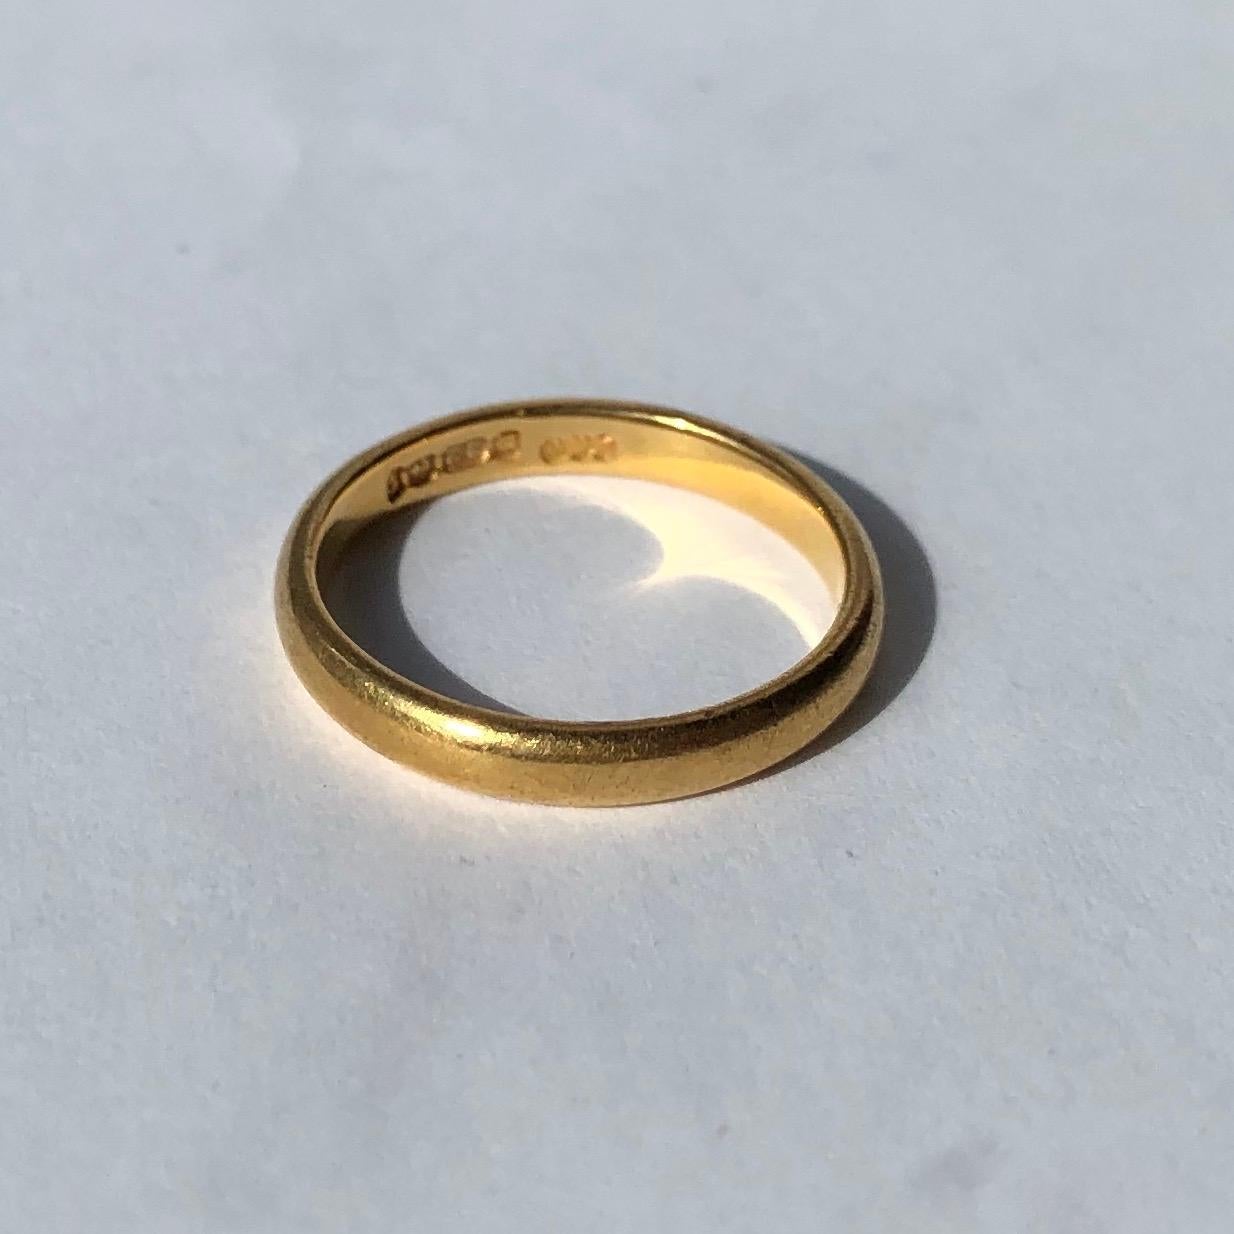 An 22ct gold band makes the perfectly classic wedding band or a great everyday wear piece. Made in Birmingham, England. 

Ring Size: I 1/2 or 4 1/2 
Band Width: 2.5mm 

Weight: 2.76g